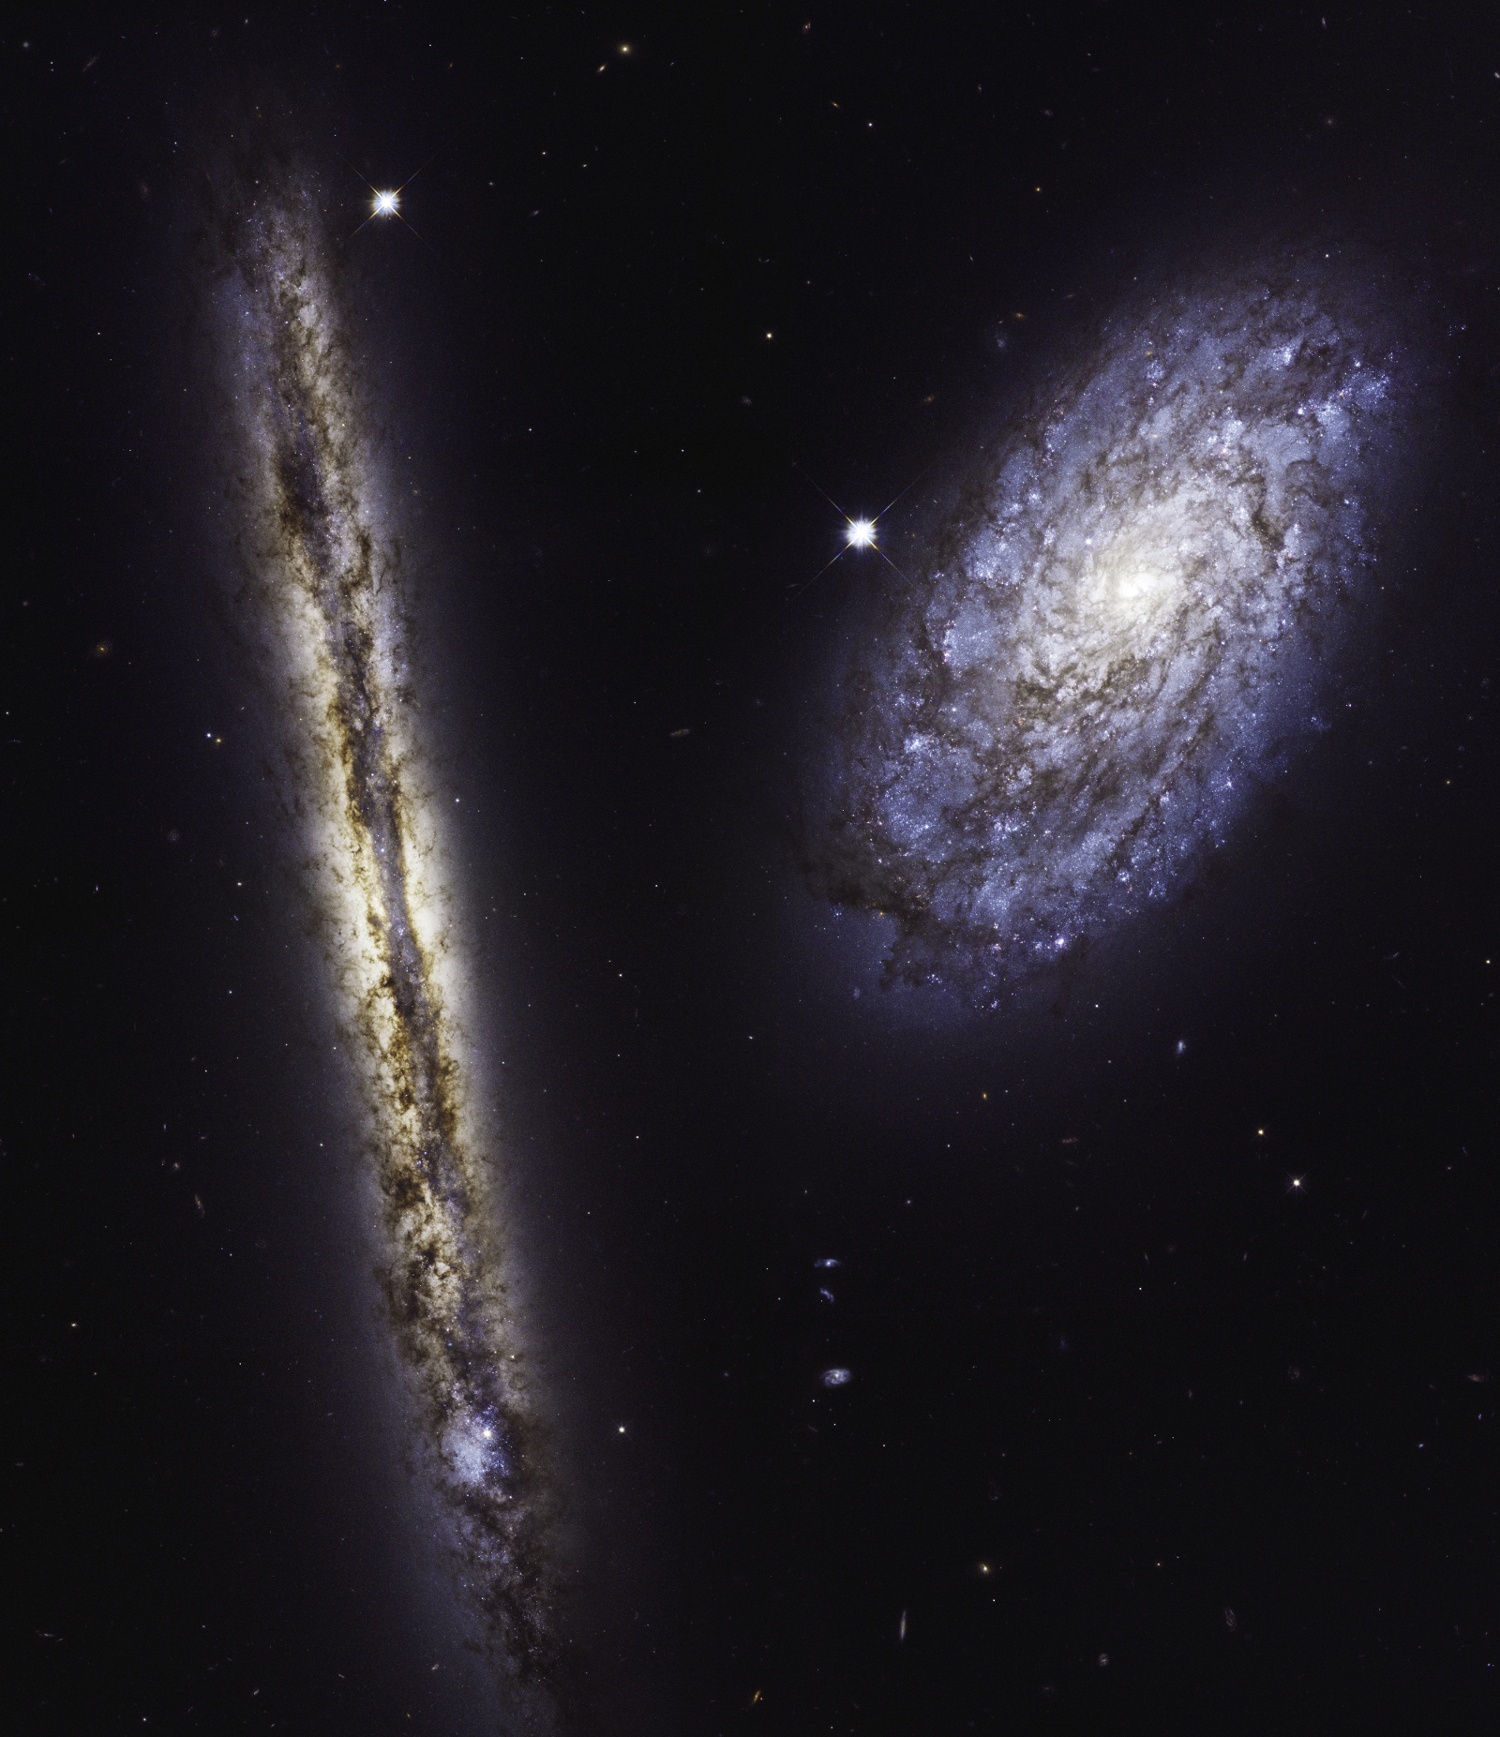 Hubble images of spiral galaxies NGC 4302 (left) and NGC 4298 (right) in visible and infrared light. Image: NASA, ESA, and M. Mutchler (STScI)